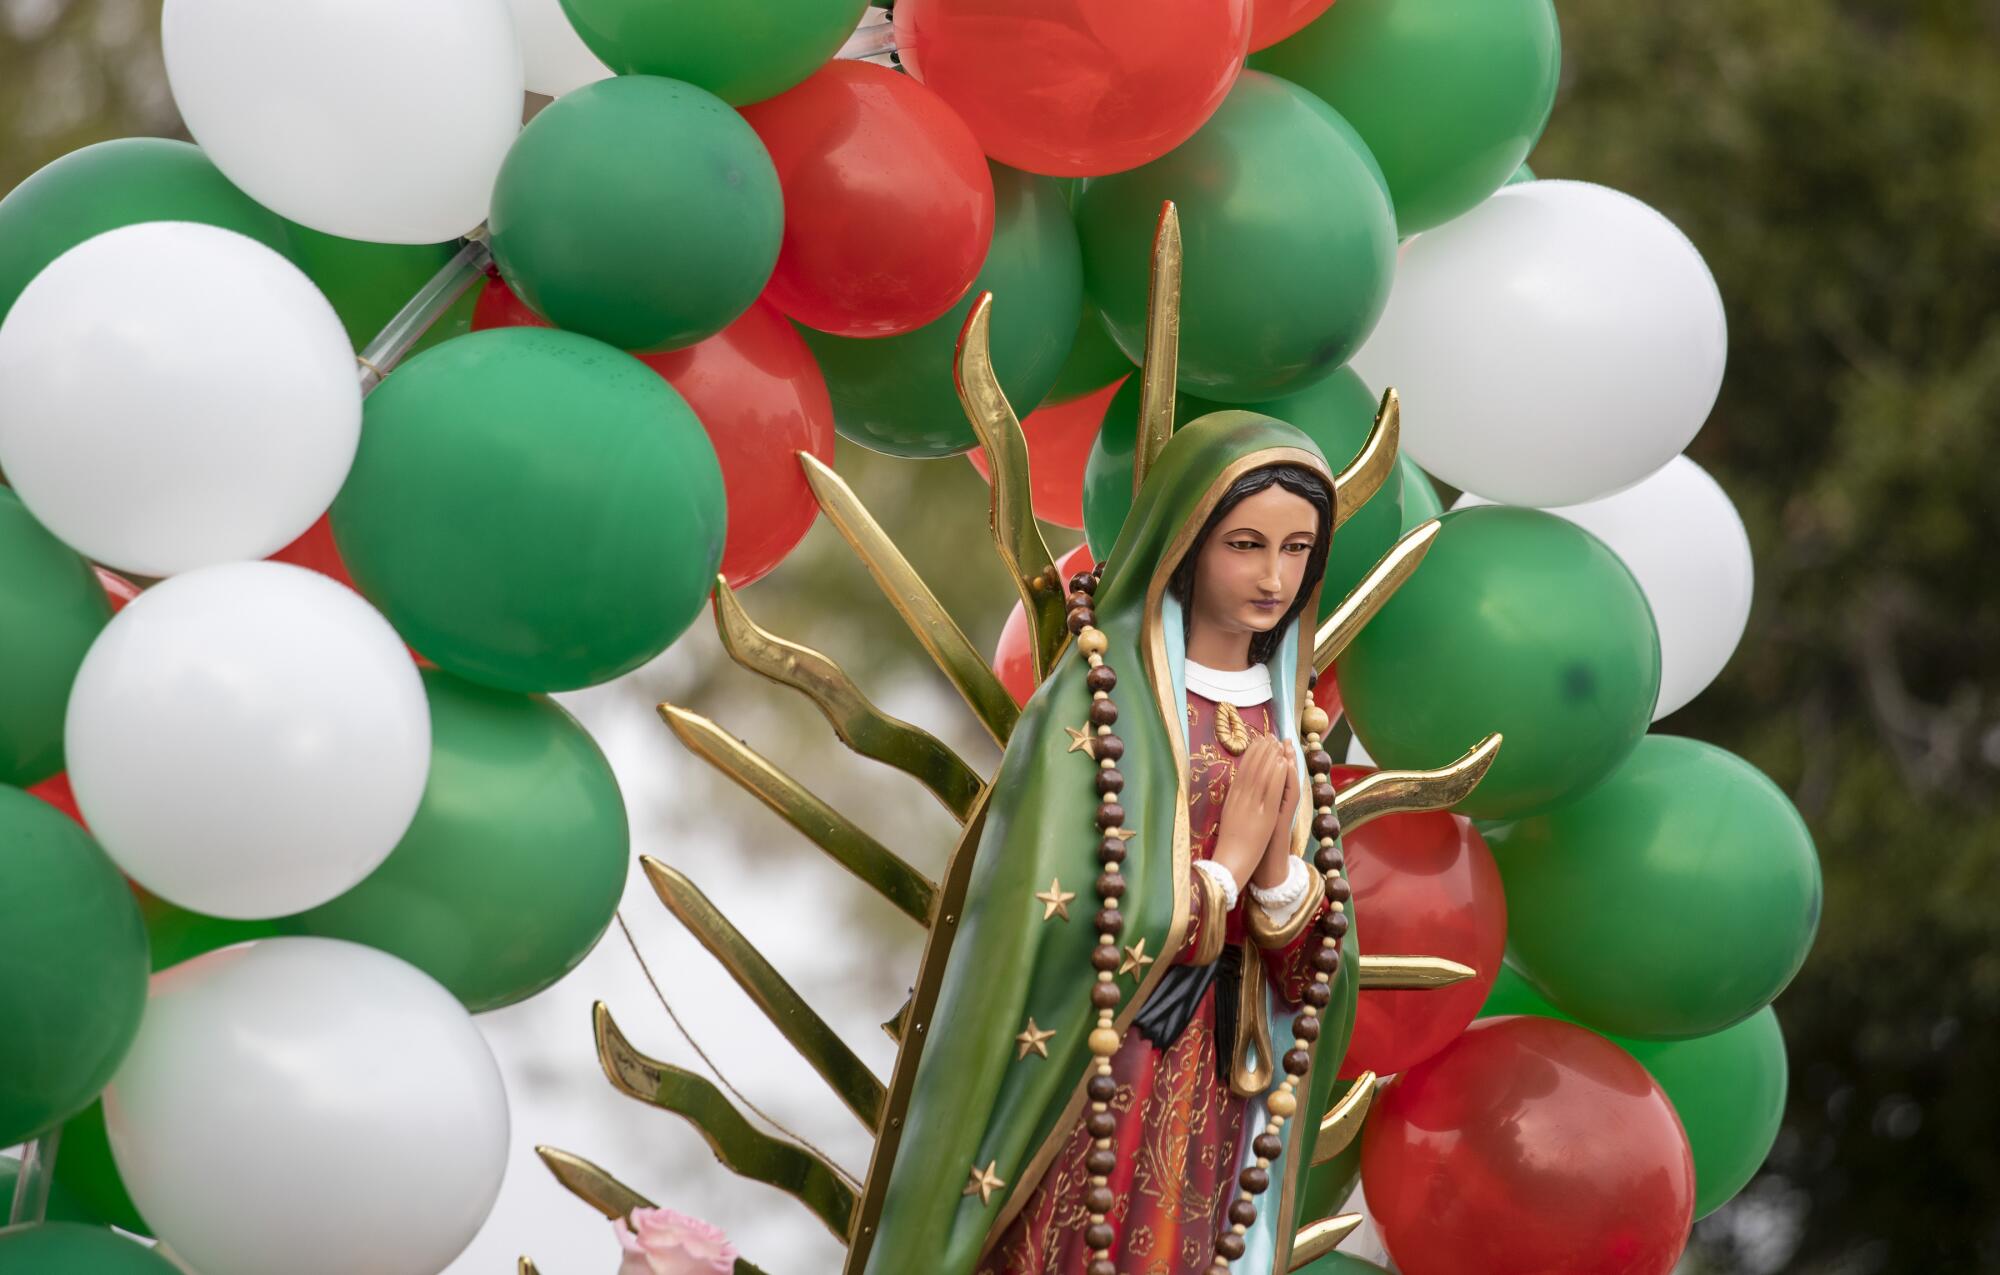 Rays of gold emanate from a statue of the Virgin of Guadalupe, surrounded by red, green and white balloons